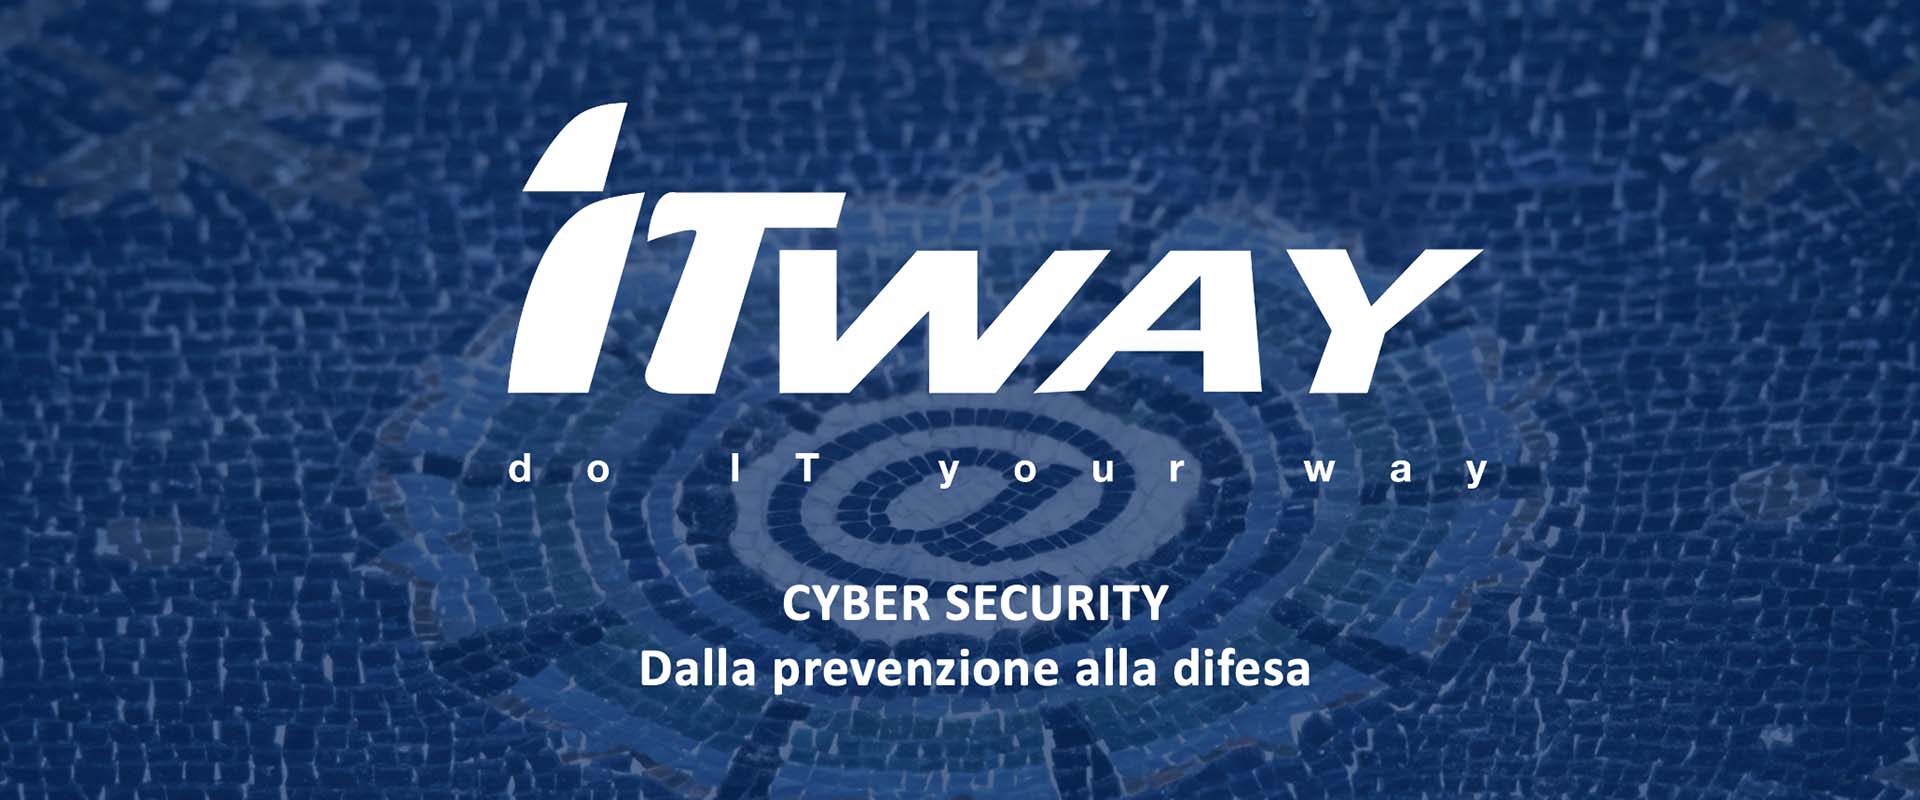 cyber security service itway